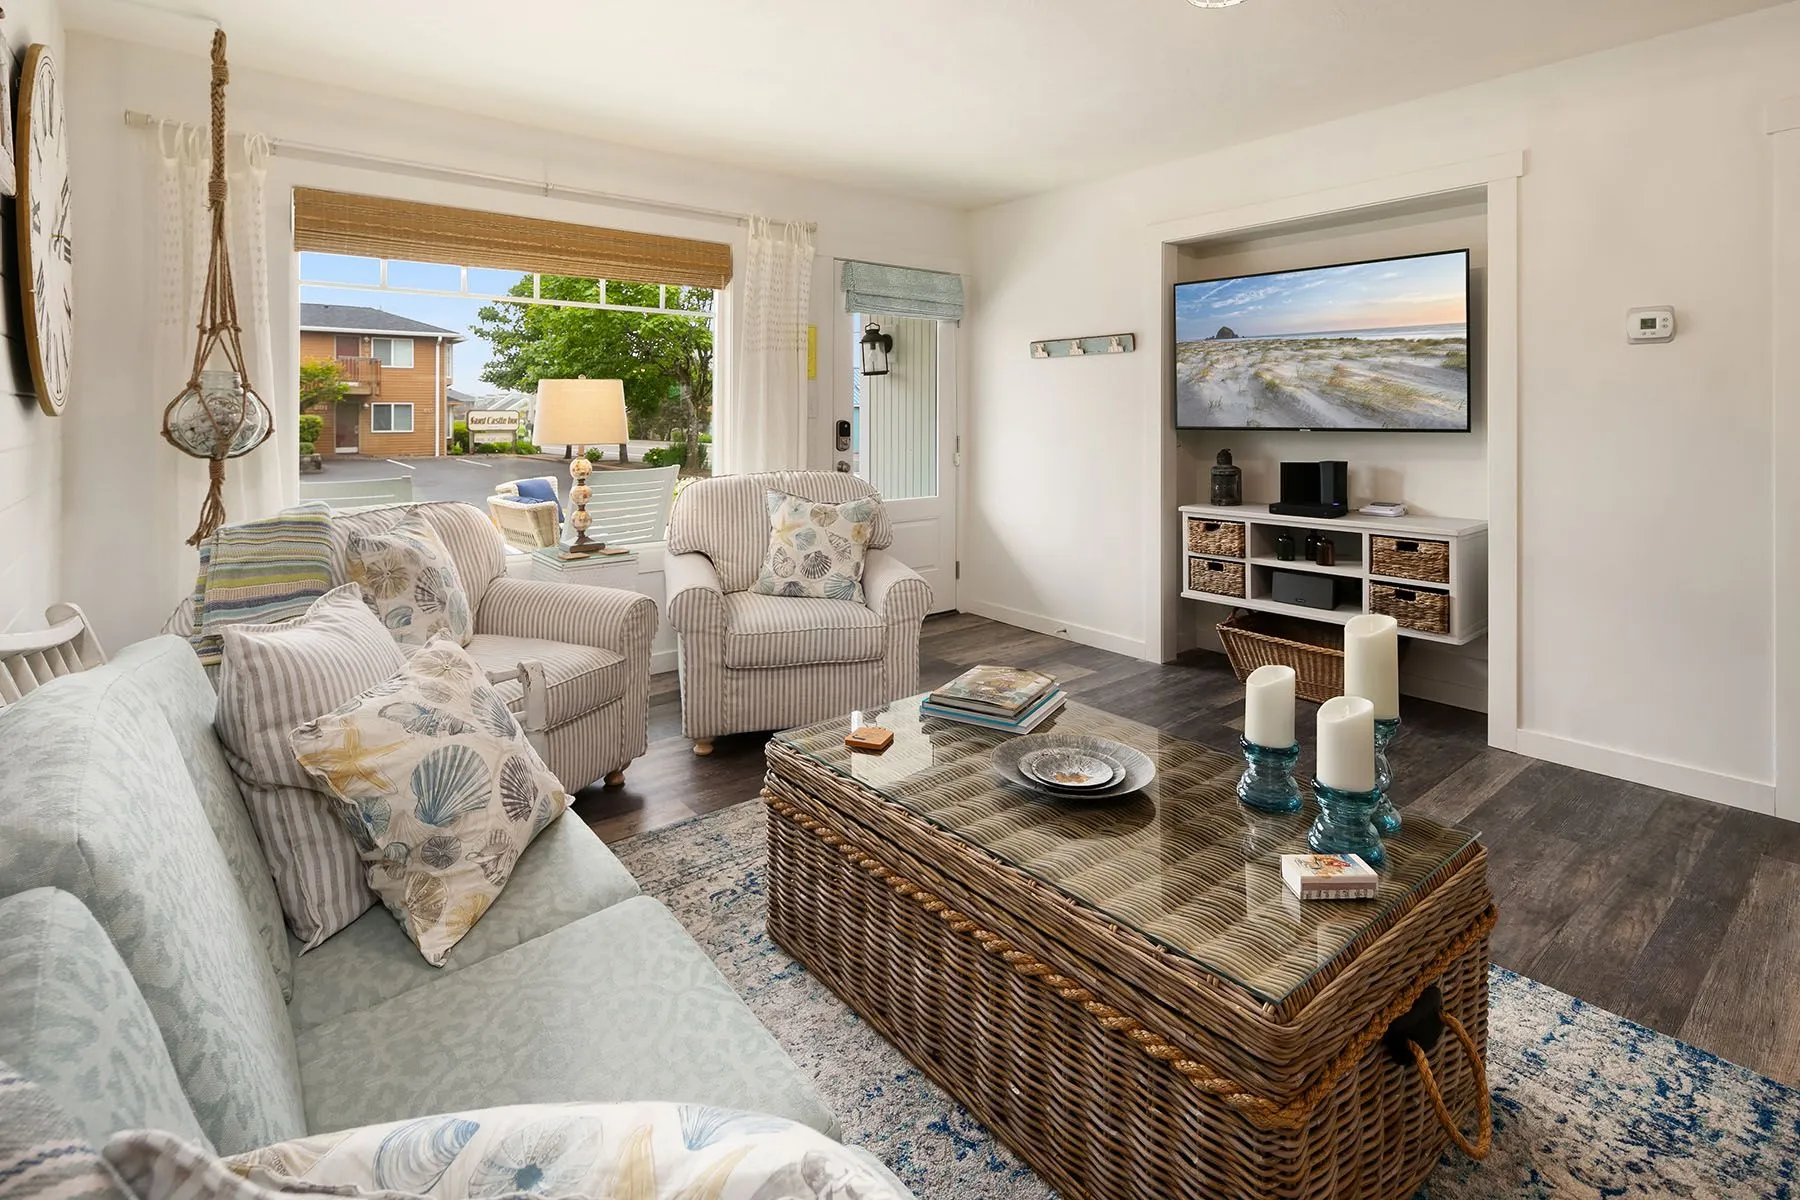 Vacation Rental in Cannon Beach, Beach Blessing living room with couch, armchairs and a TV